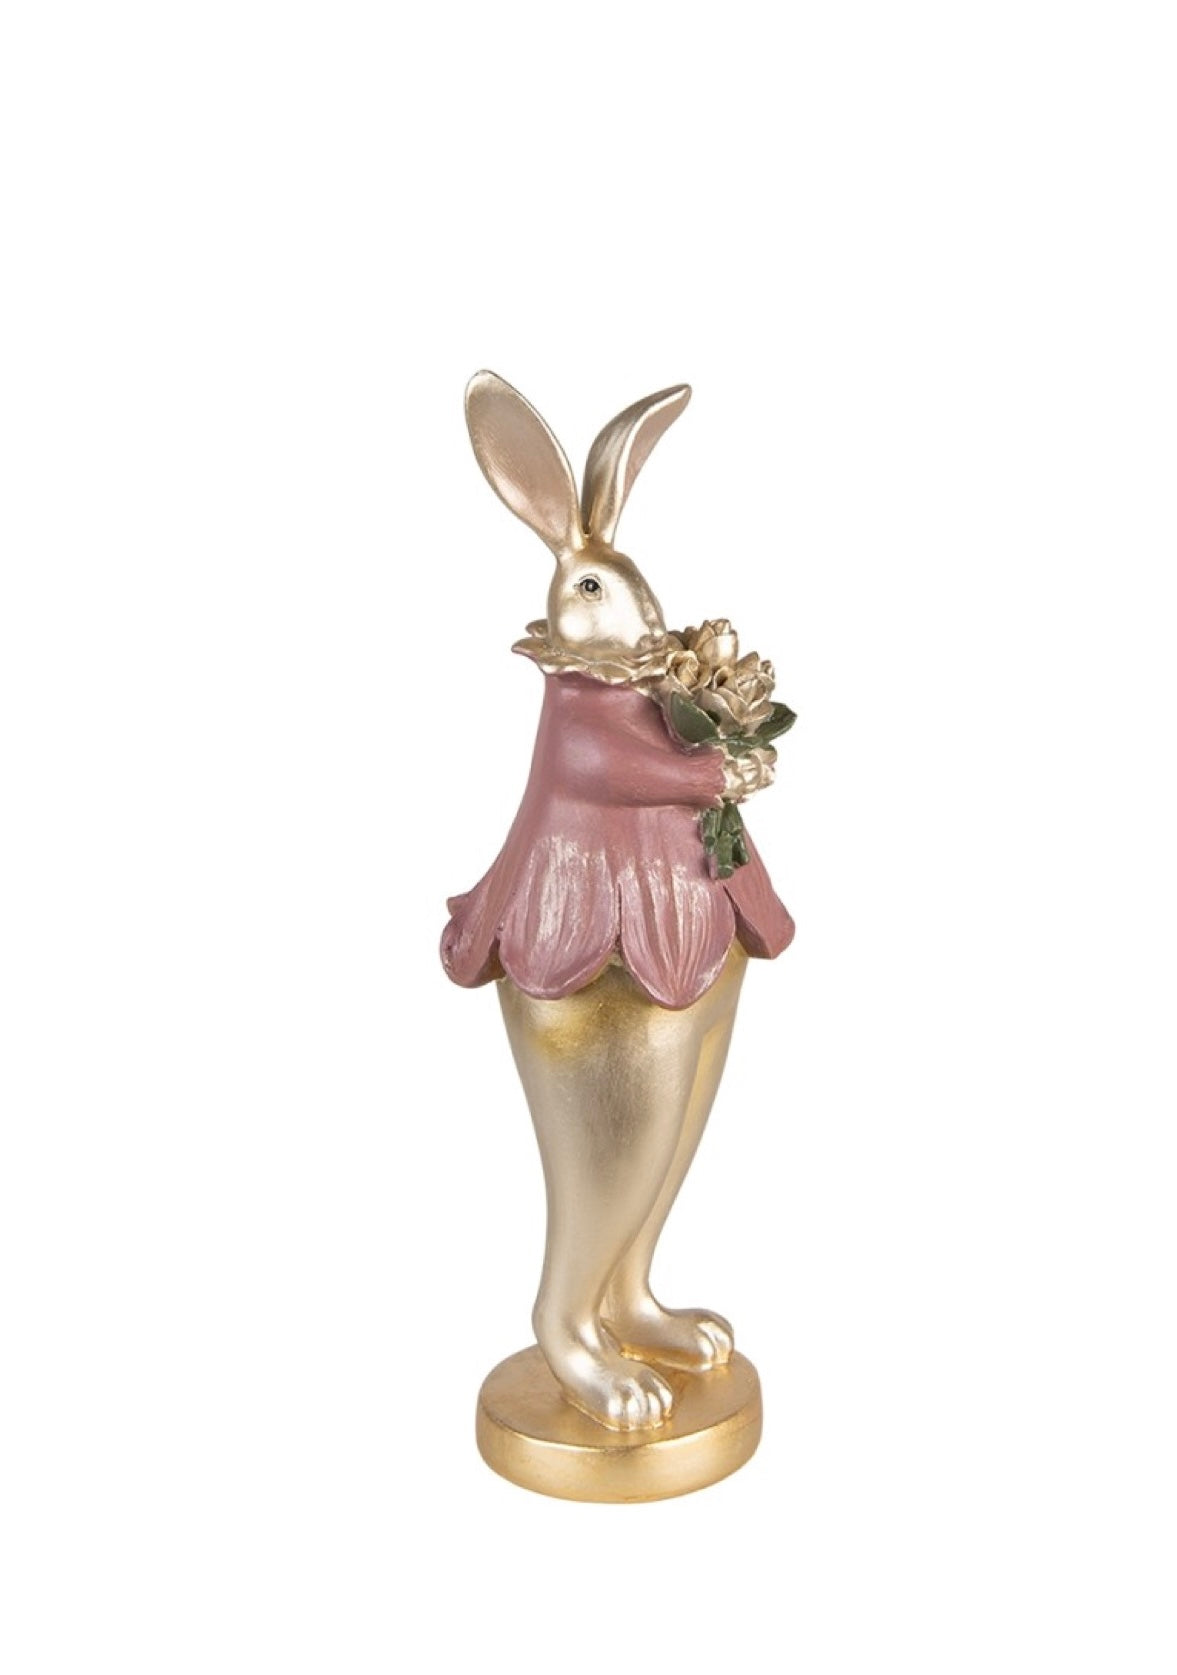 Bunny statue with pink dress